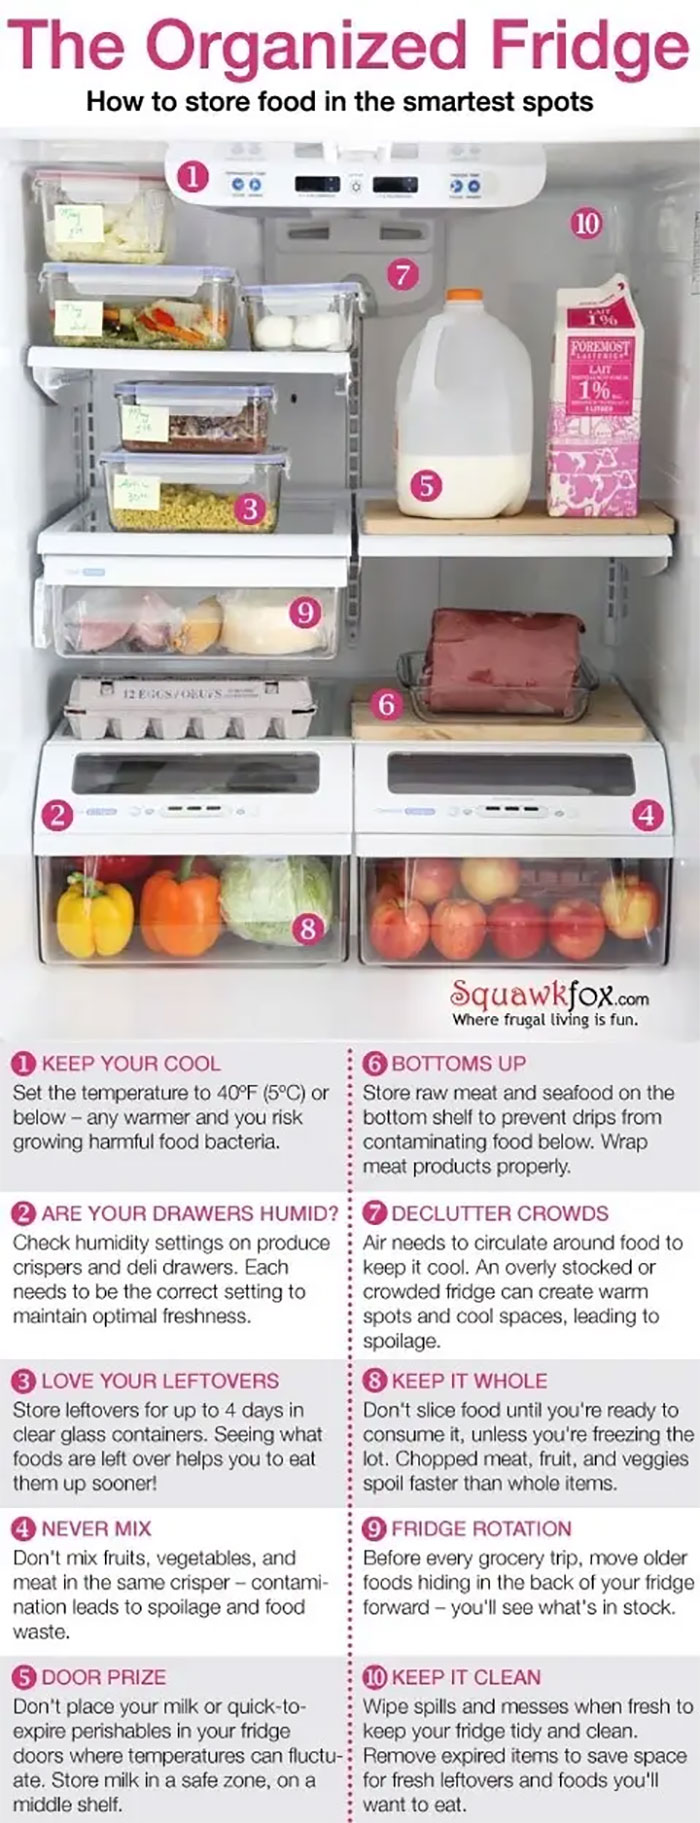 Follow These Rules On Where To Place Items Within Your Fridge